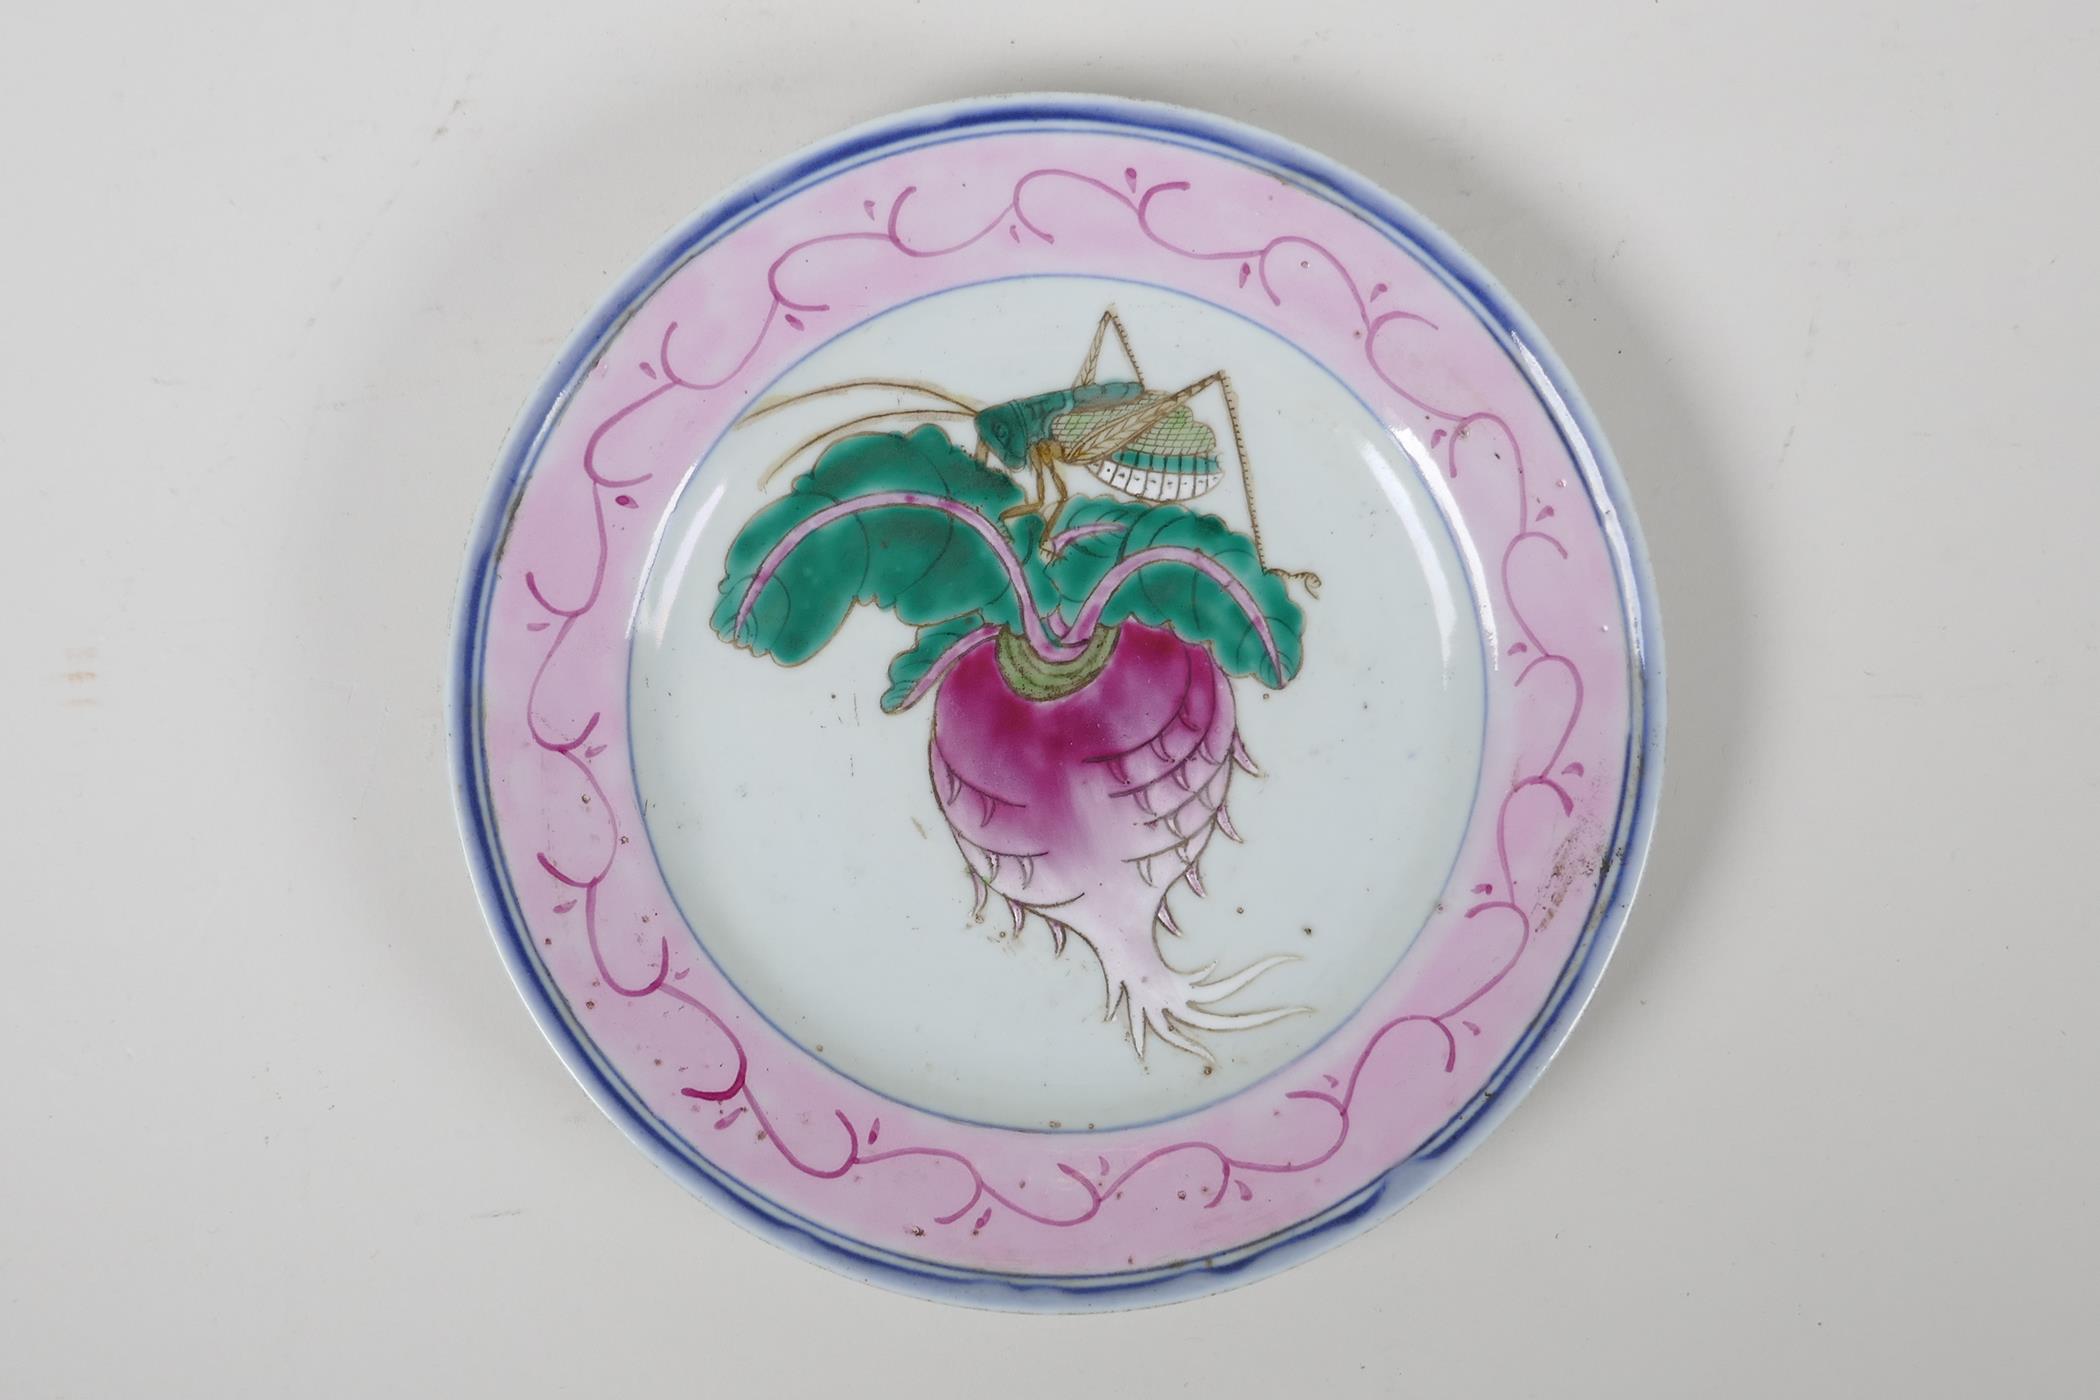 A late C19th/early C20th famille rose porcelain cabinet plate decorated with a radish and cricket,